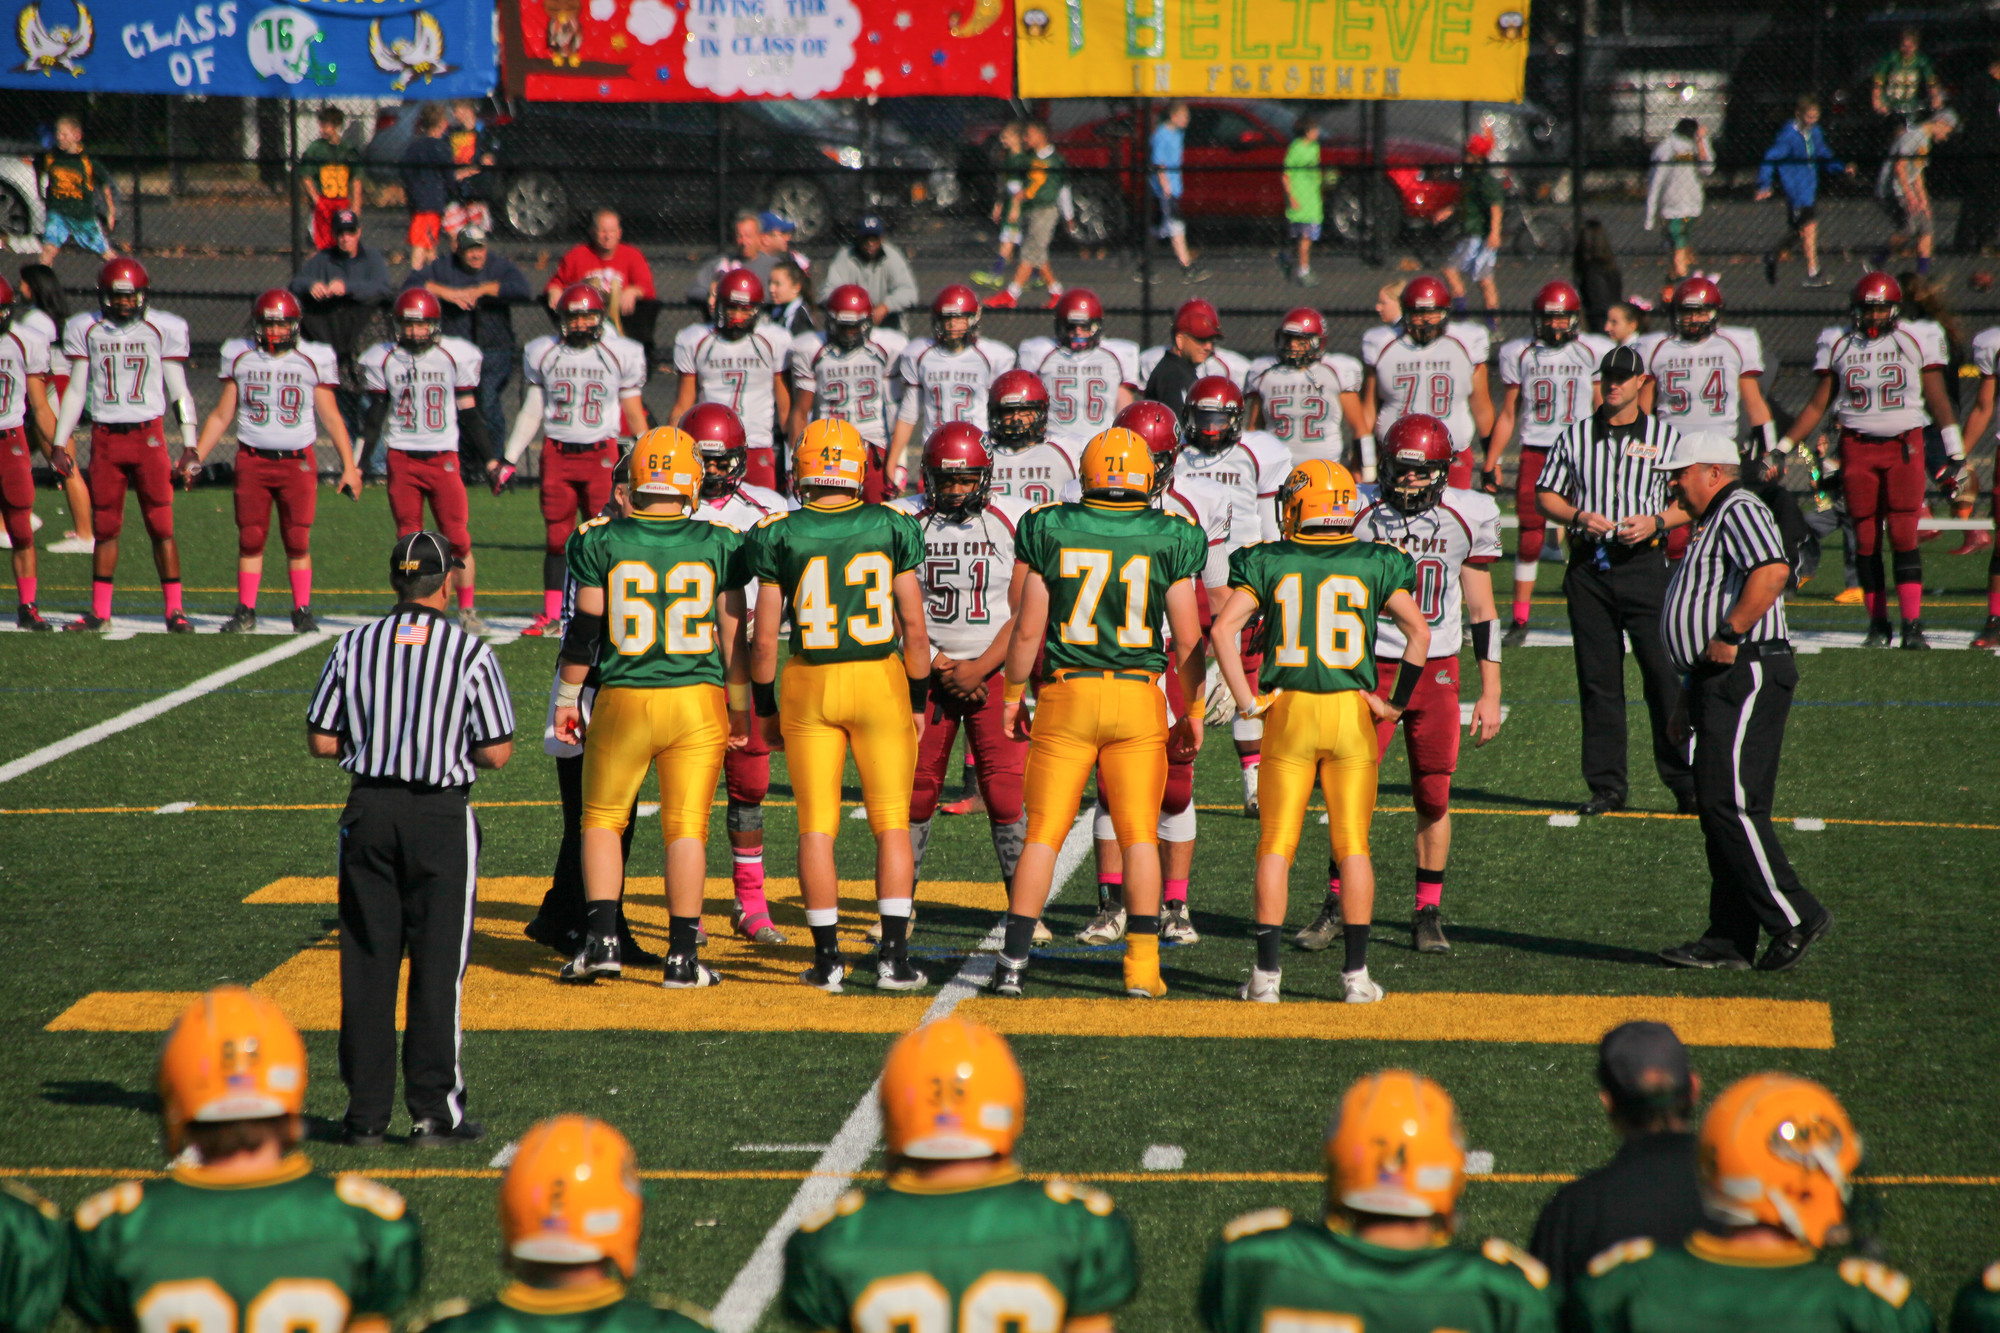 Lynbrook and Glen Cove line up for the coin toss before the start of the game.